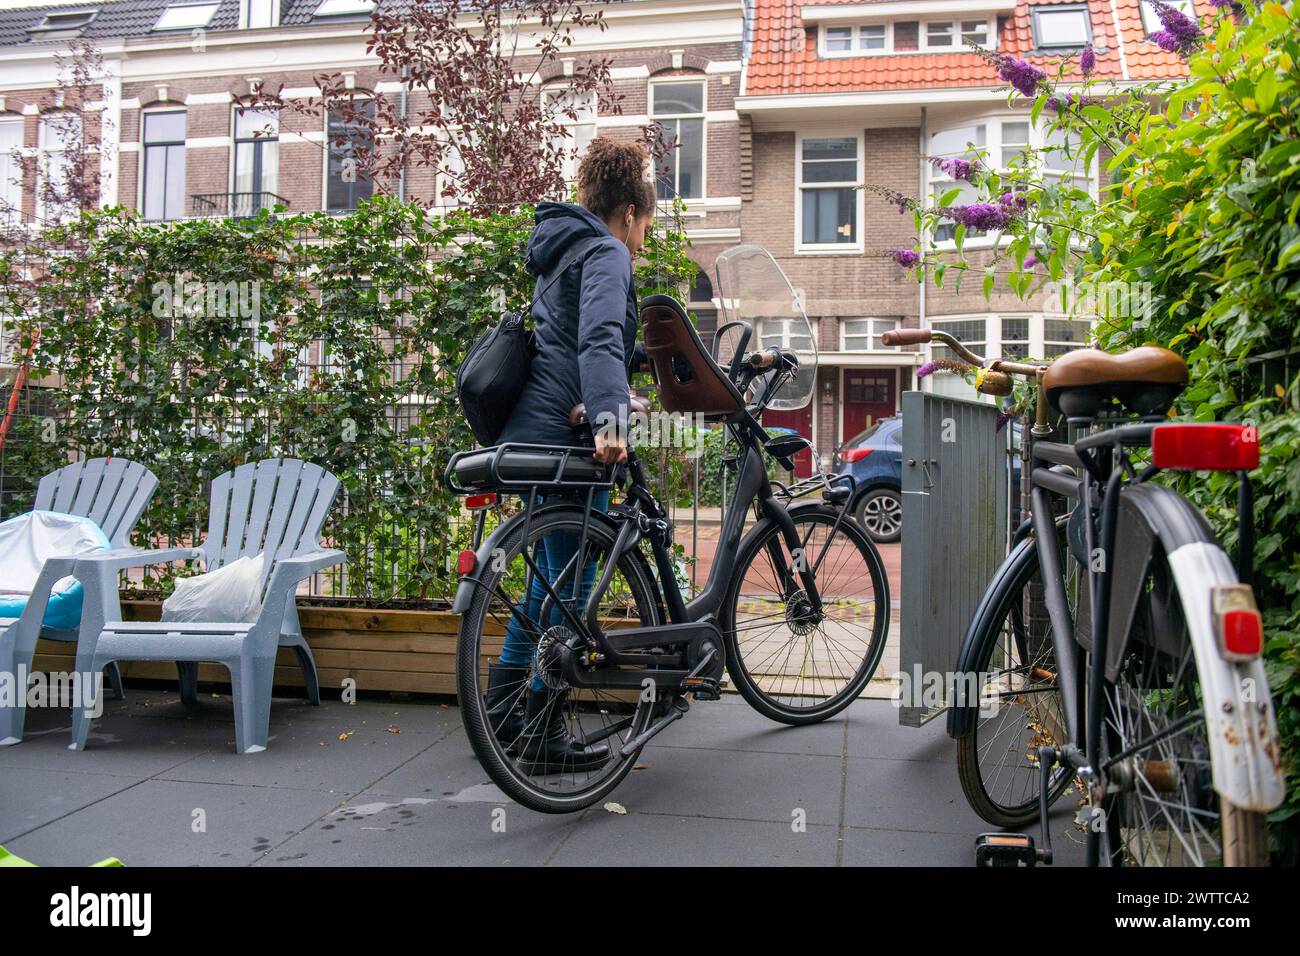 A cyclist pauses by a city bike parked in a quaint European street. Stock Photo